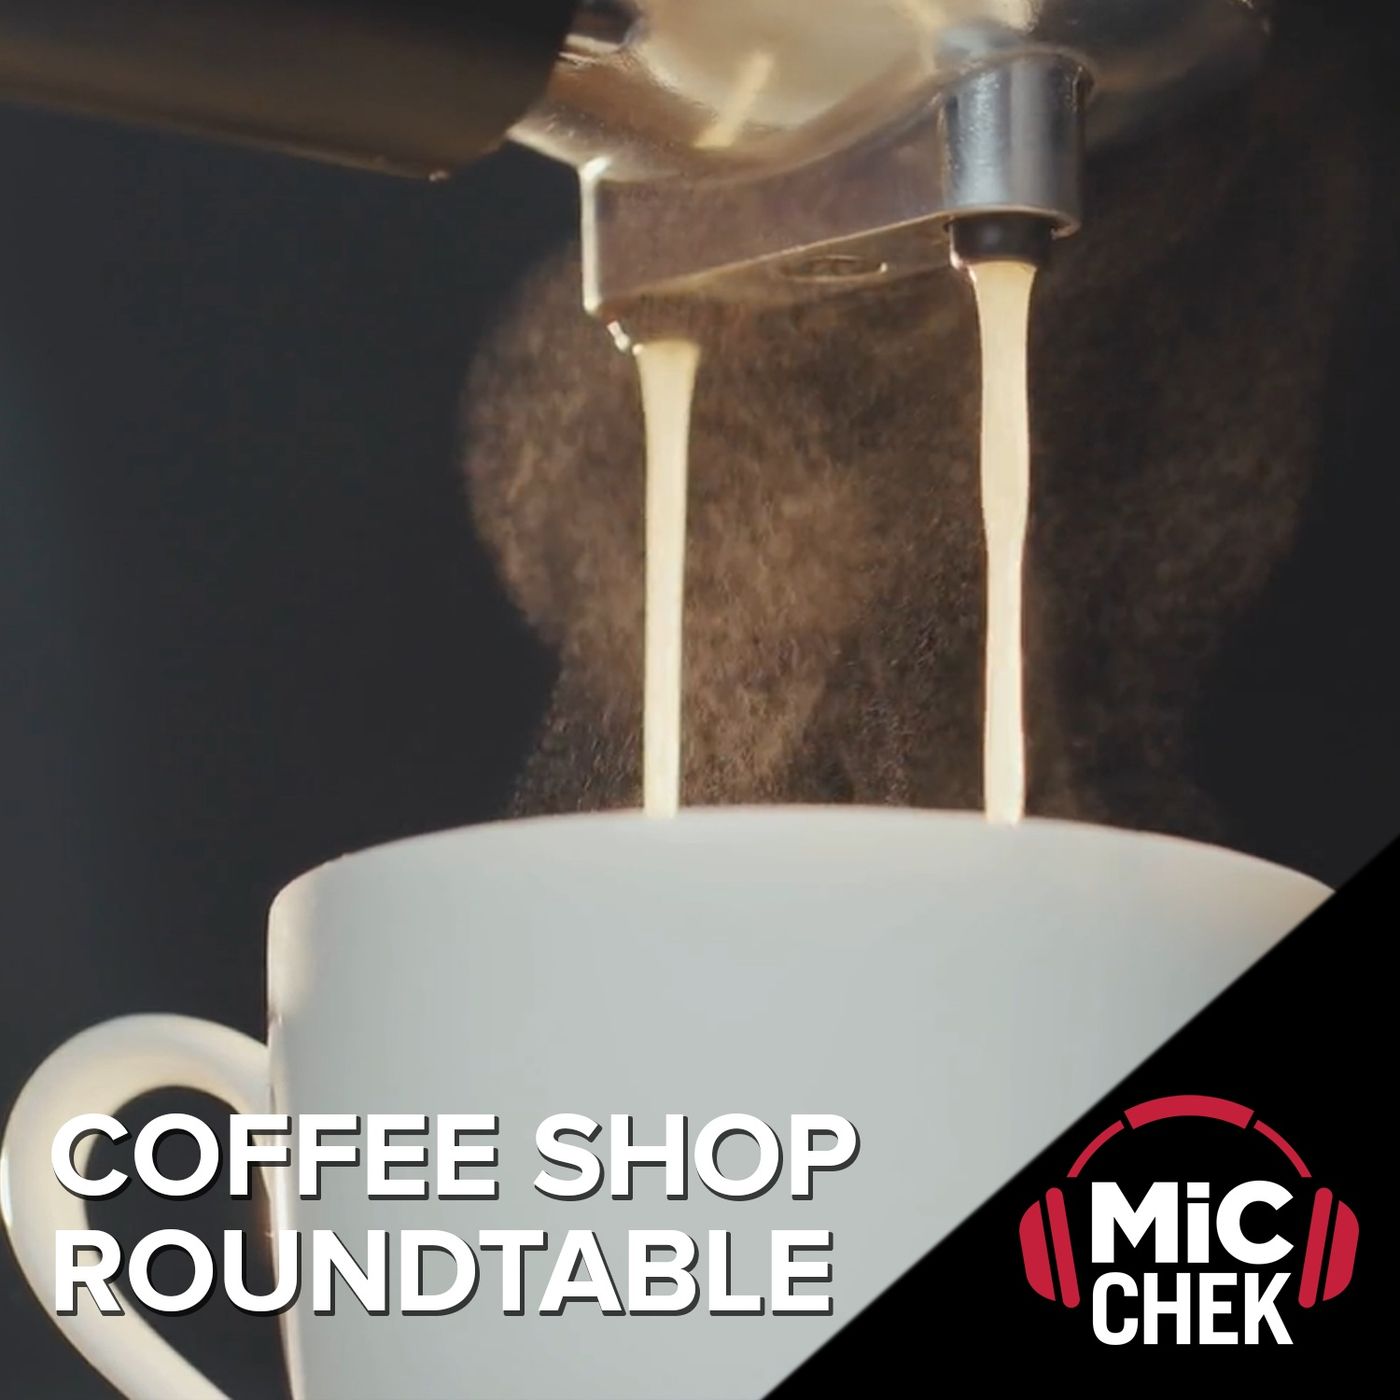 Ep. 176 - Revisiting the Coffee Shop ROUNDTABLE